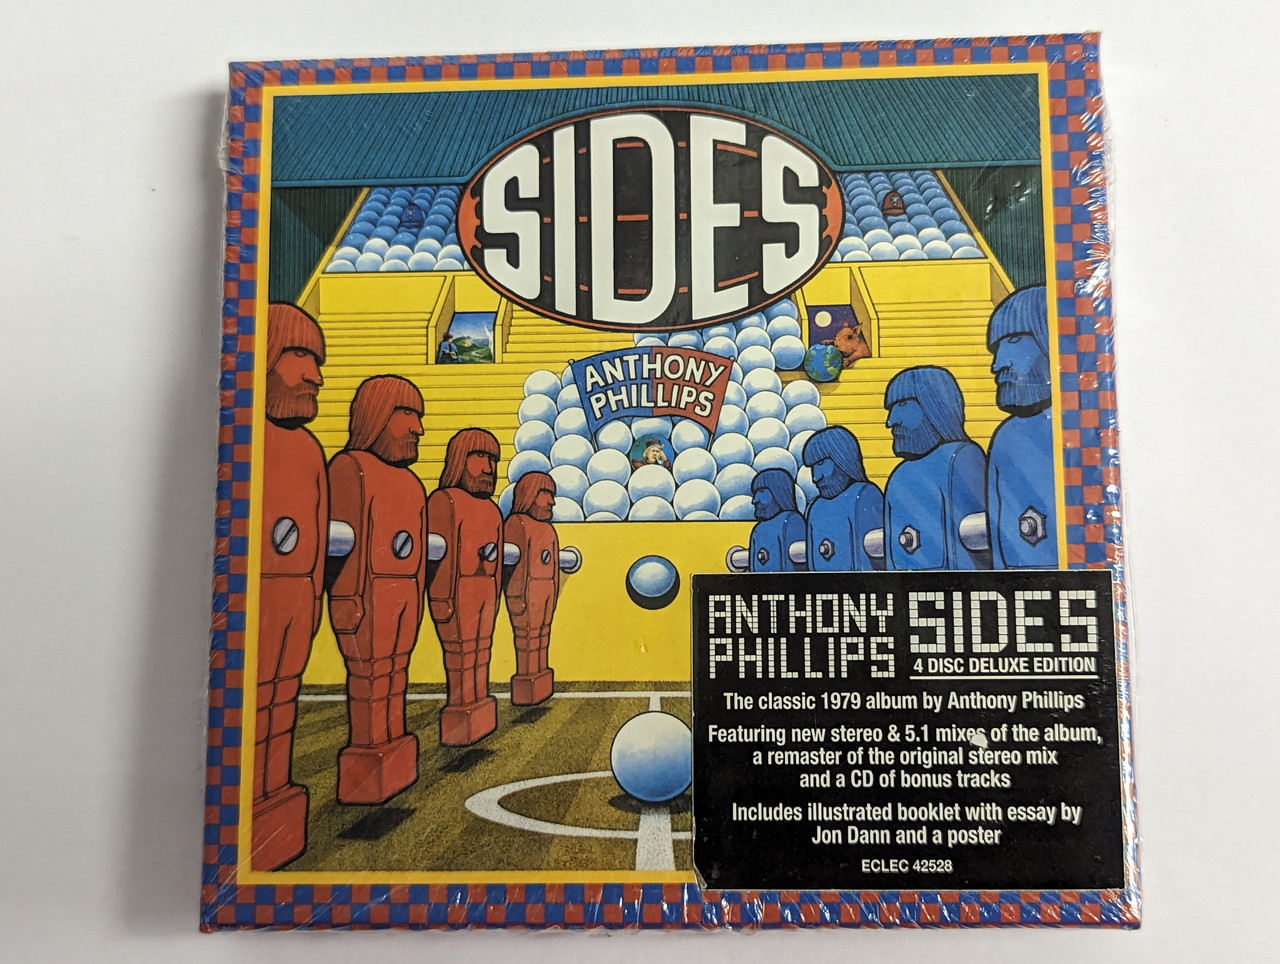 https://cdn10.bigcommerce.com/s-62bdpkt7pb/products/0/images/302580/Anthony_Phillips_Sides_4_Disc_Deluxe_Edition_The_classic_1979_album_by_Anthony_Philips_Featuring_new_stereo_5._1_mixes_of_the_album_a_remaster_of_the_original_stereo_mix_Esoteric_Re_1__86579.1696510889.1280.1280.jpg?c=2&_gl=1*1201att*_ga*MjA2NTIxMjE2MC4xNTkwNTEyNTMy*_ga_WS2VZYPC6G*MTY5NjUxMDI4Ny4xMDg5LjEuMTY5NjUxMDU2OC41MS4wLjA.